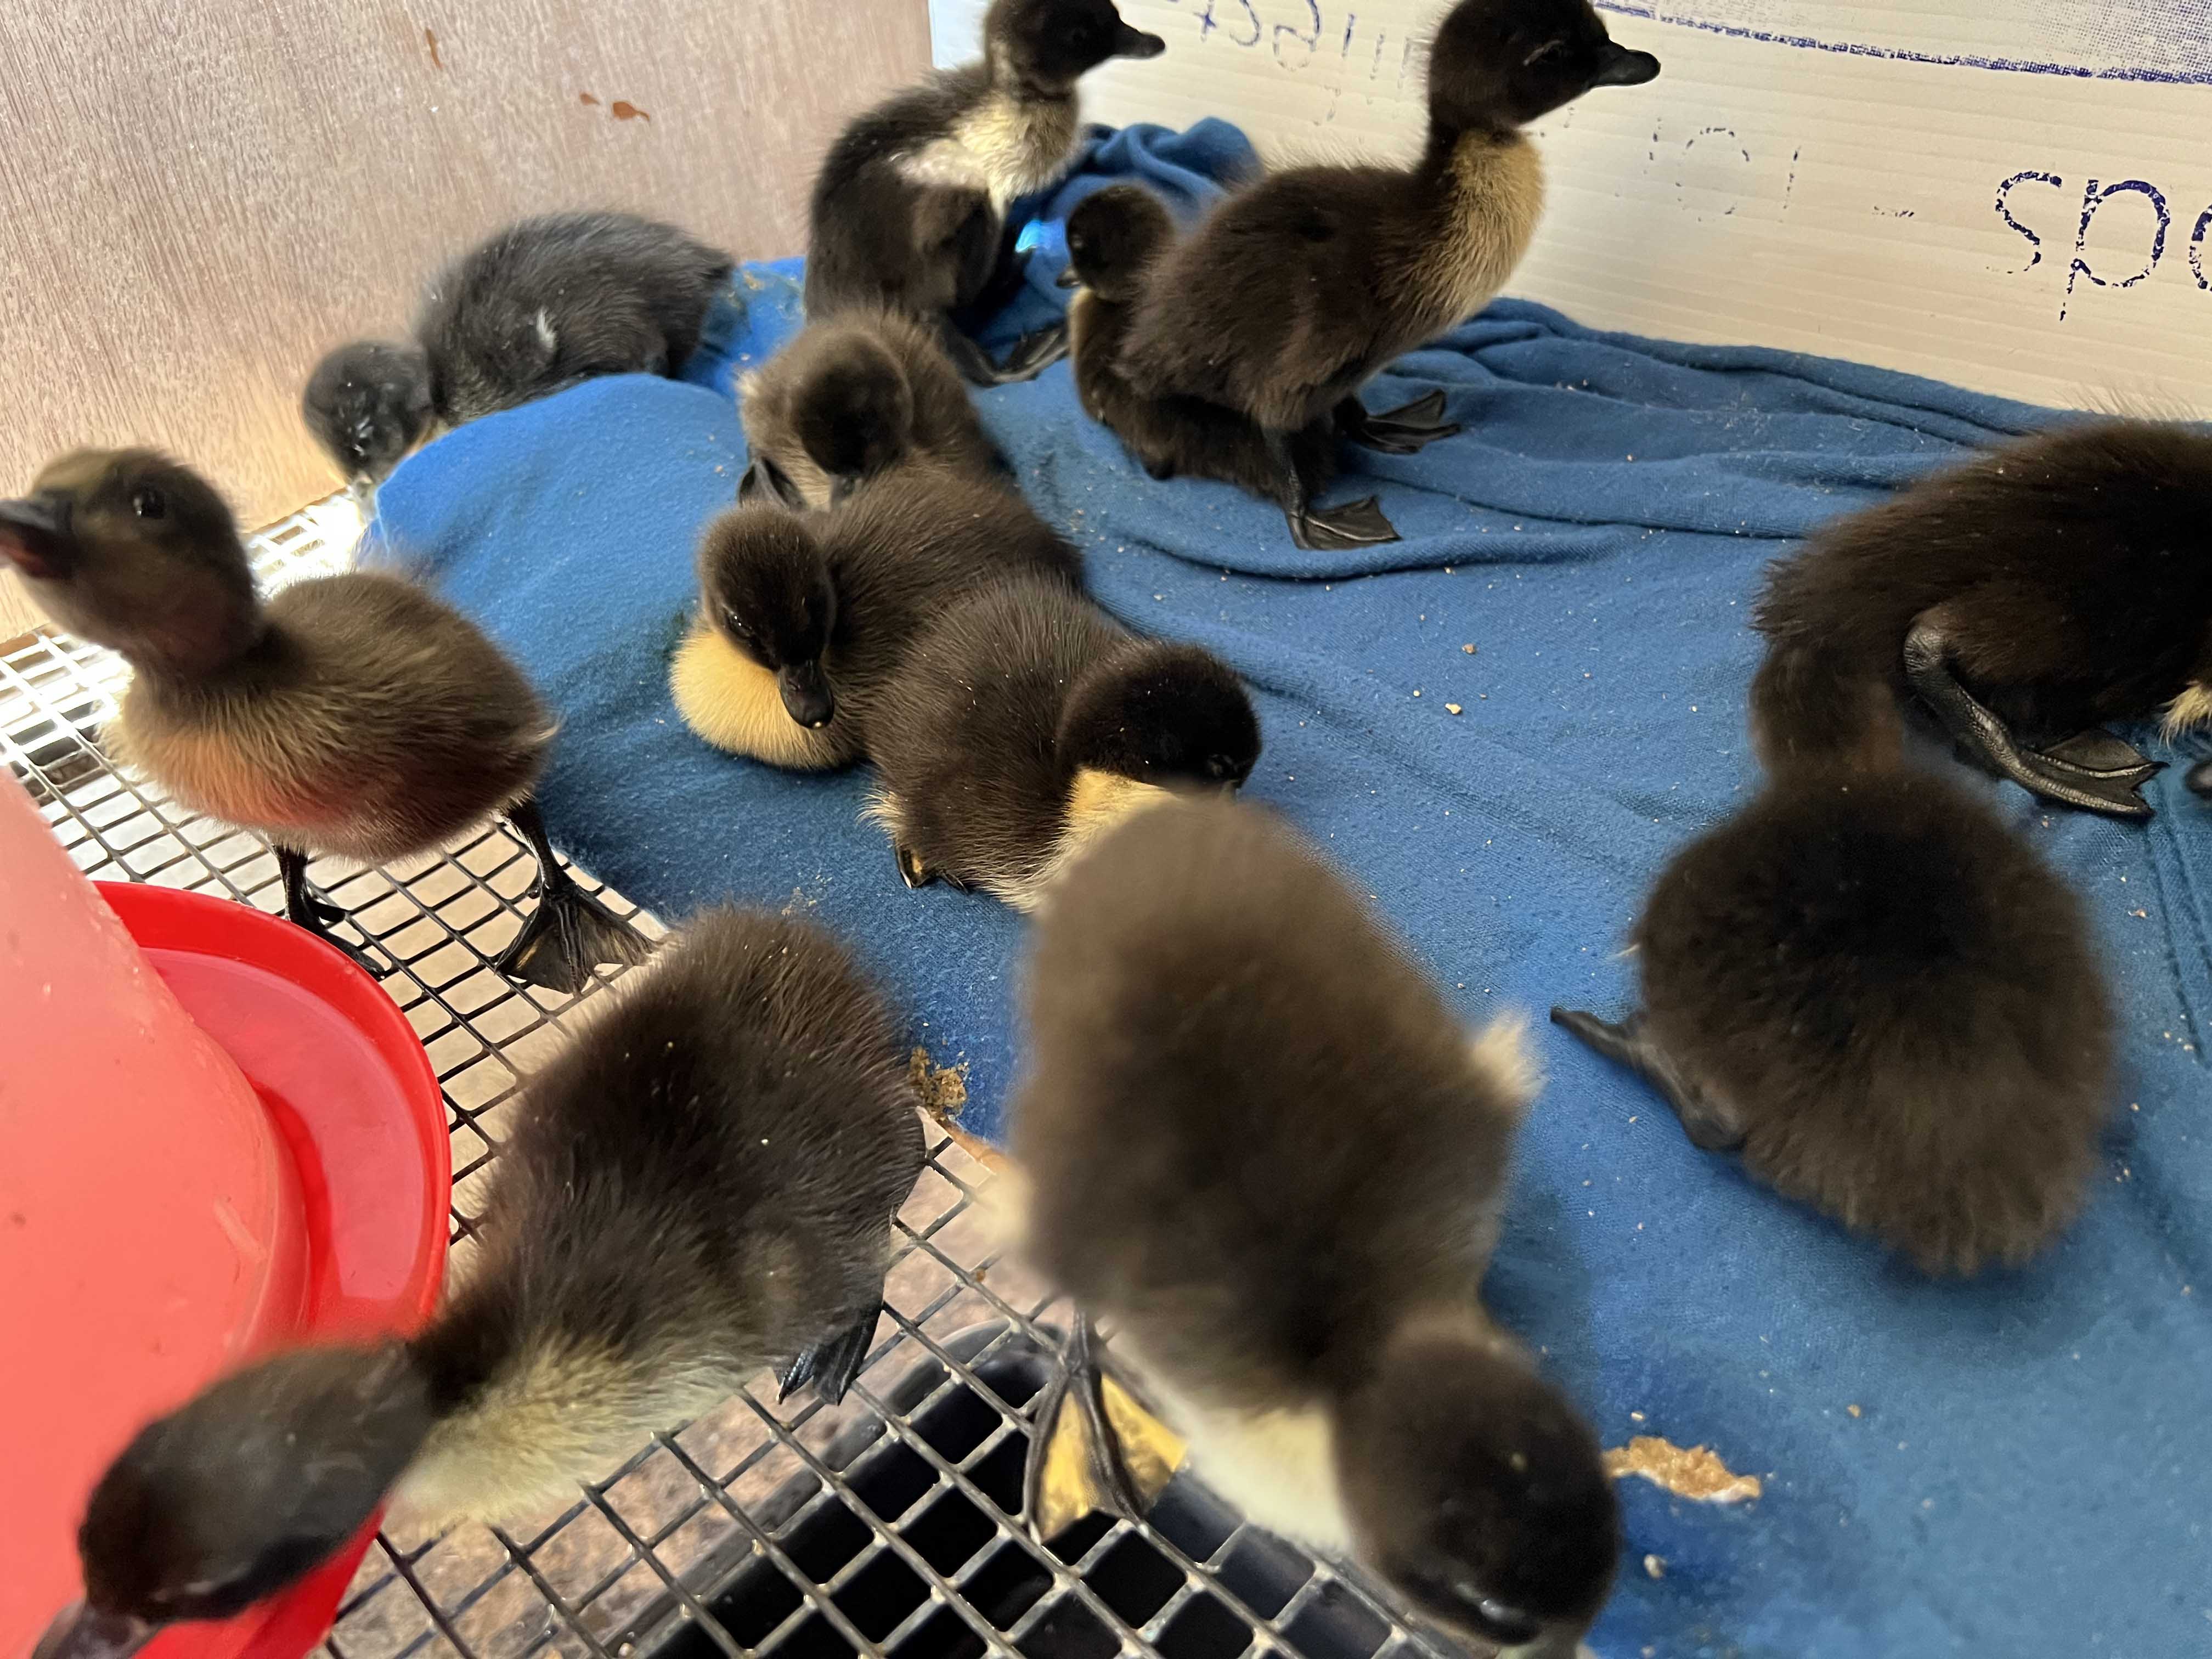 Picture of rearing ducklings